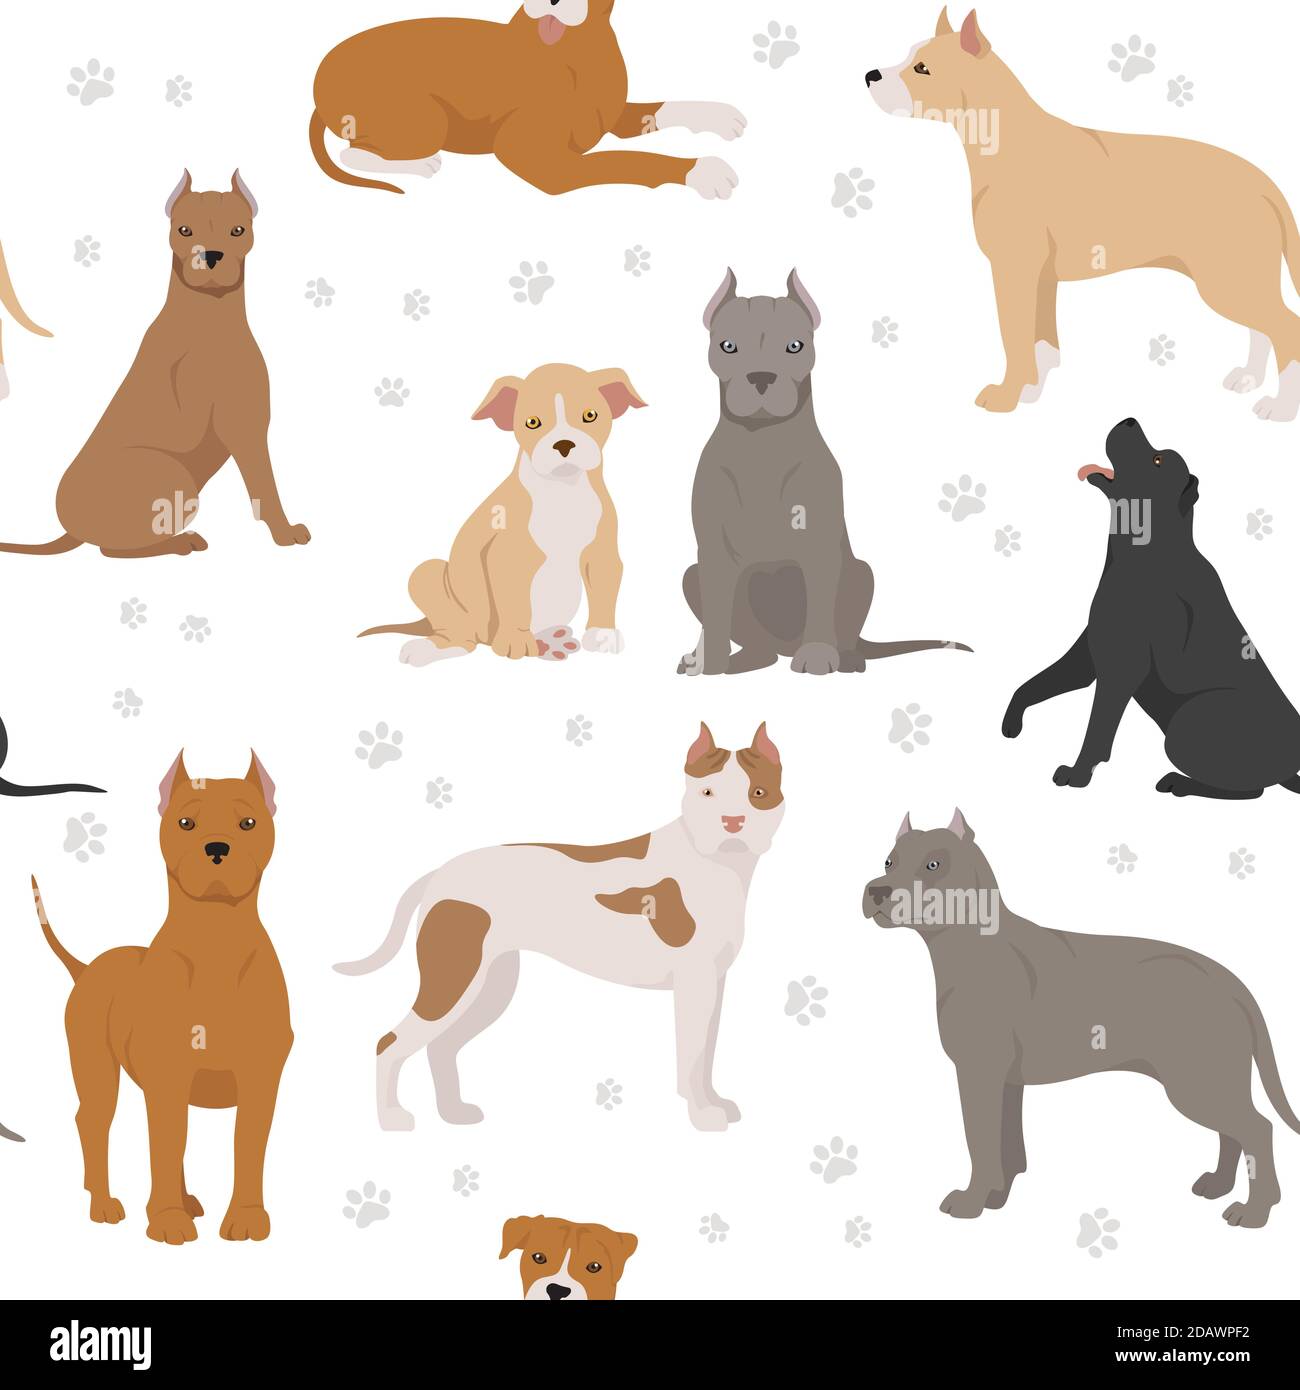 American stafford terrier pup Stock Vector Images - Alamy